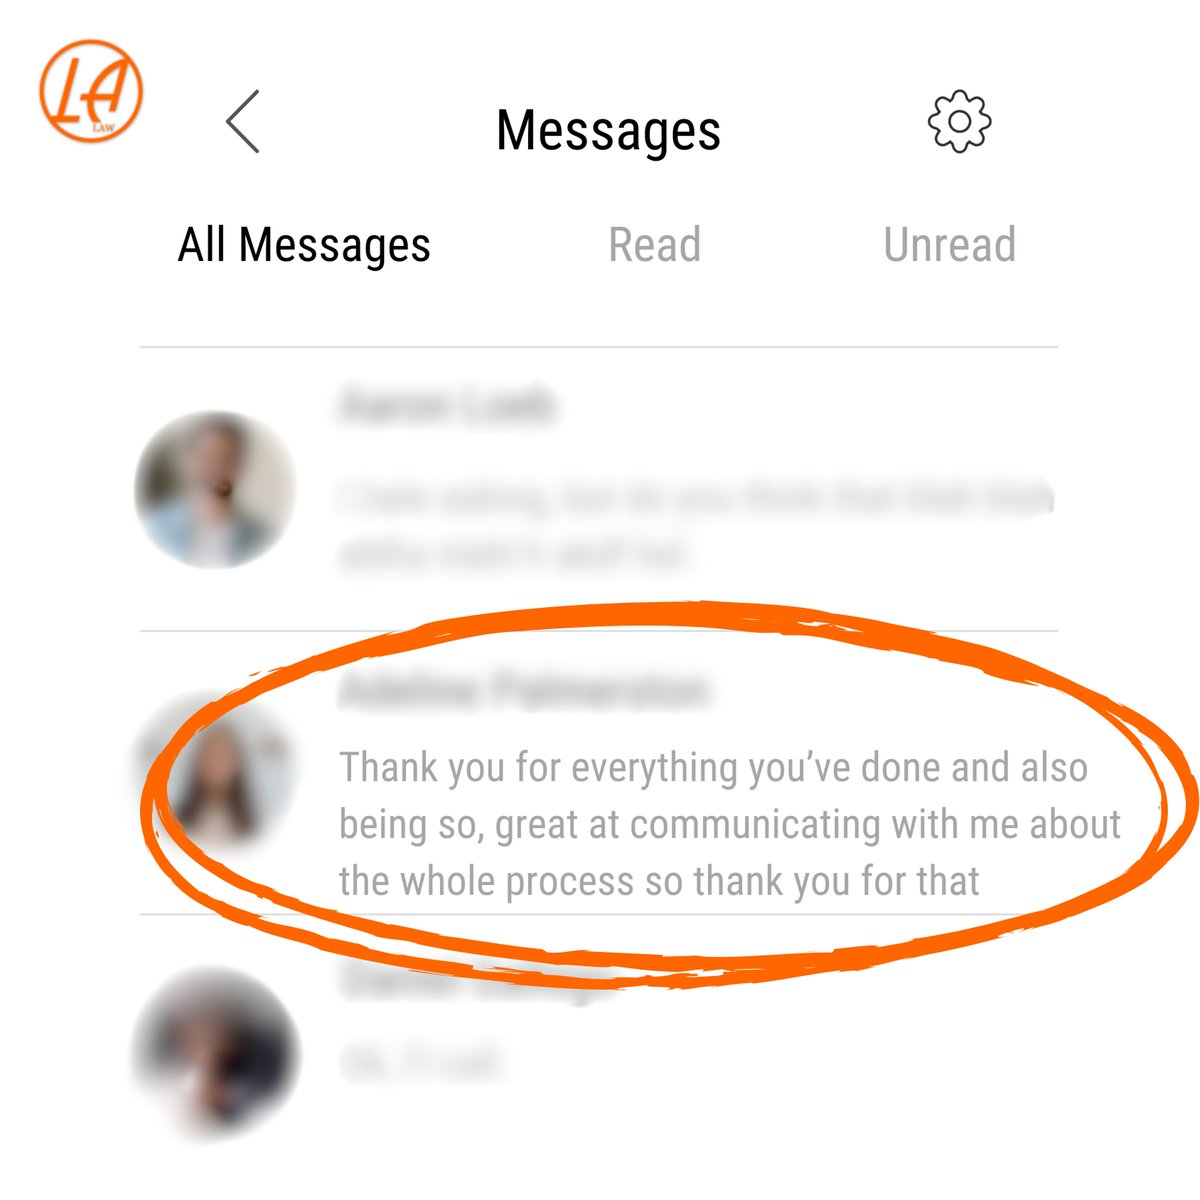 Was going through our messages with clients today and I found this! It’s stuff like this that puts a smile on me and my team’s faces 
…
#lawyerthelawyer #happyclient #review #ctlawyer #personalinjury